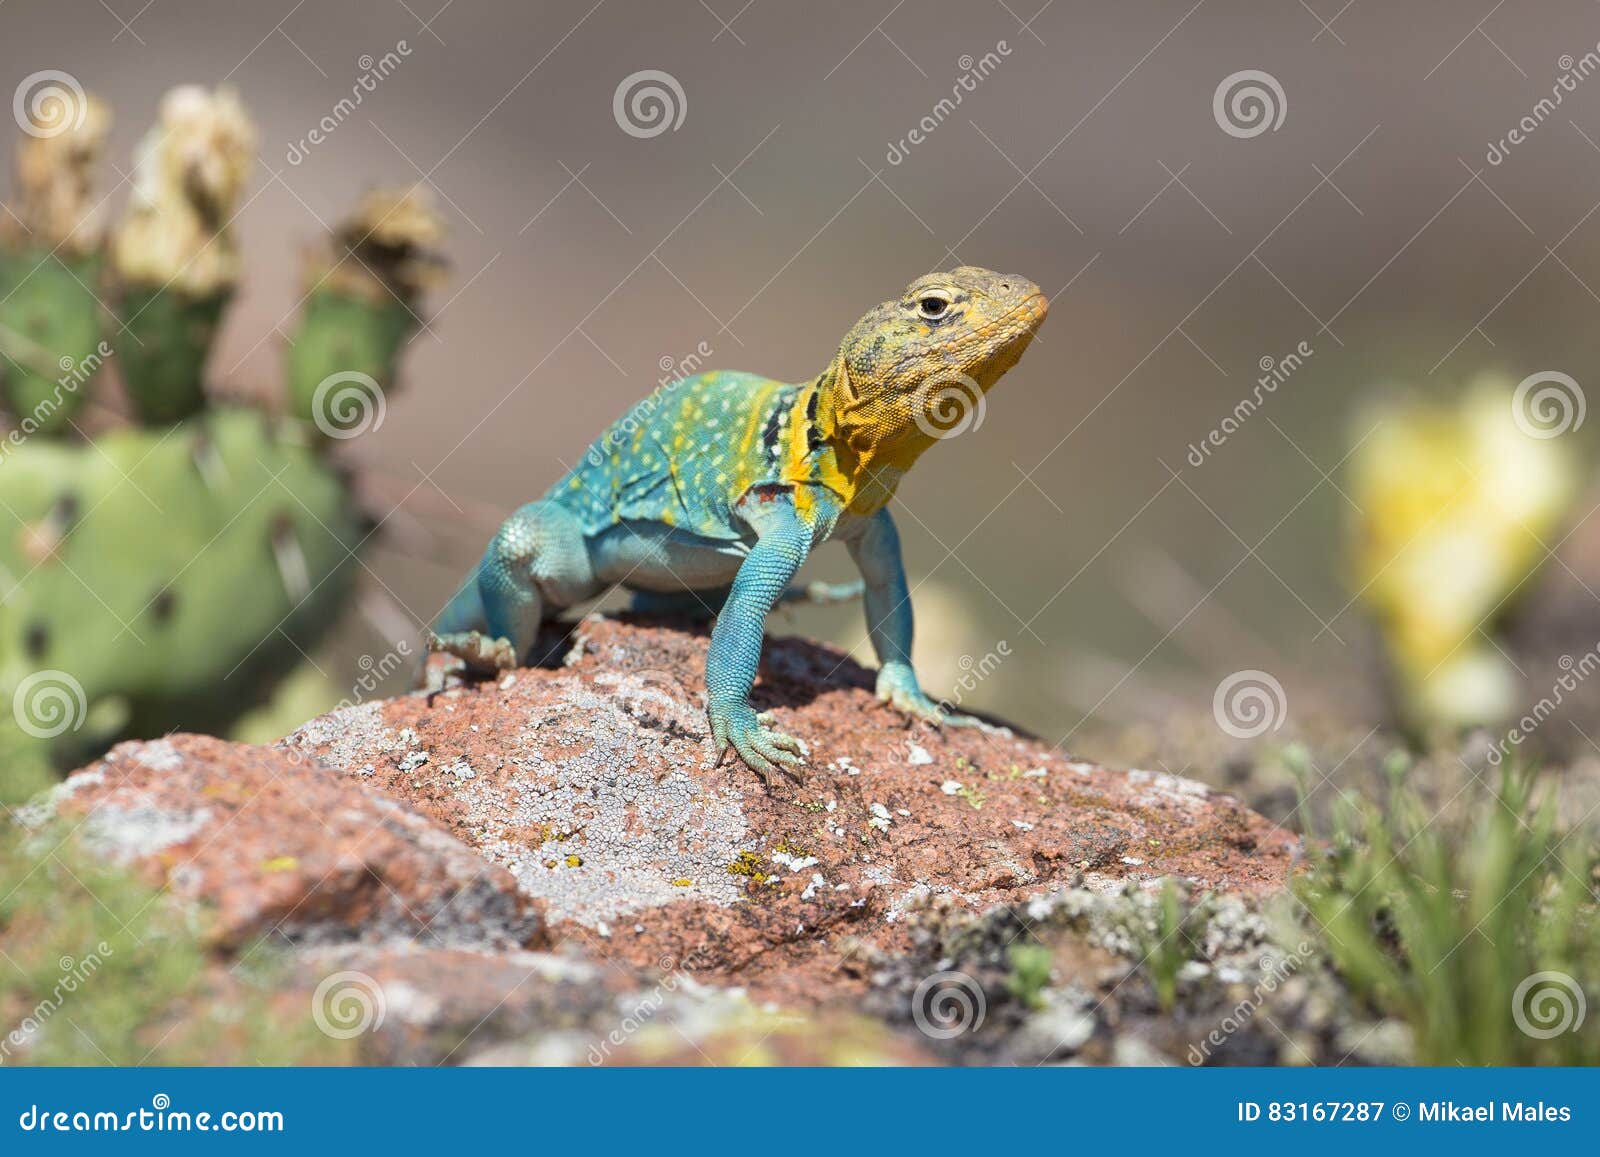 eastern collared lizard with cactus